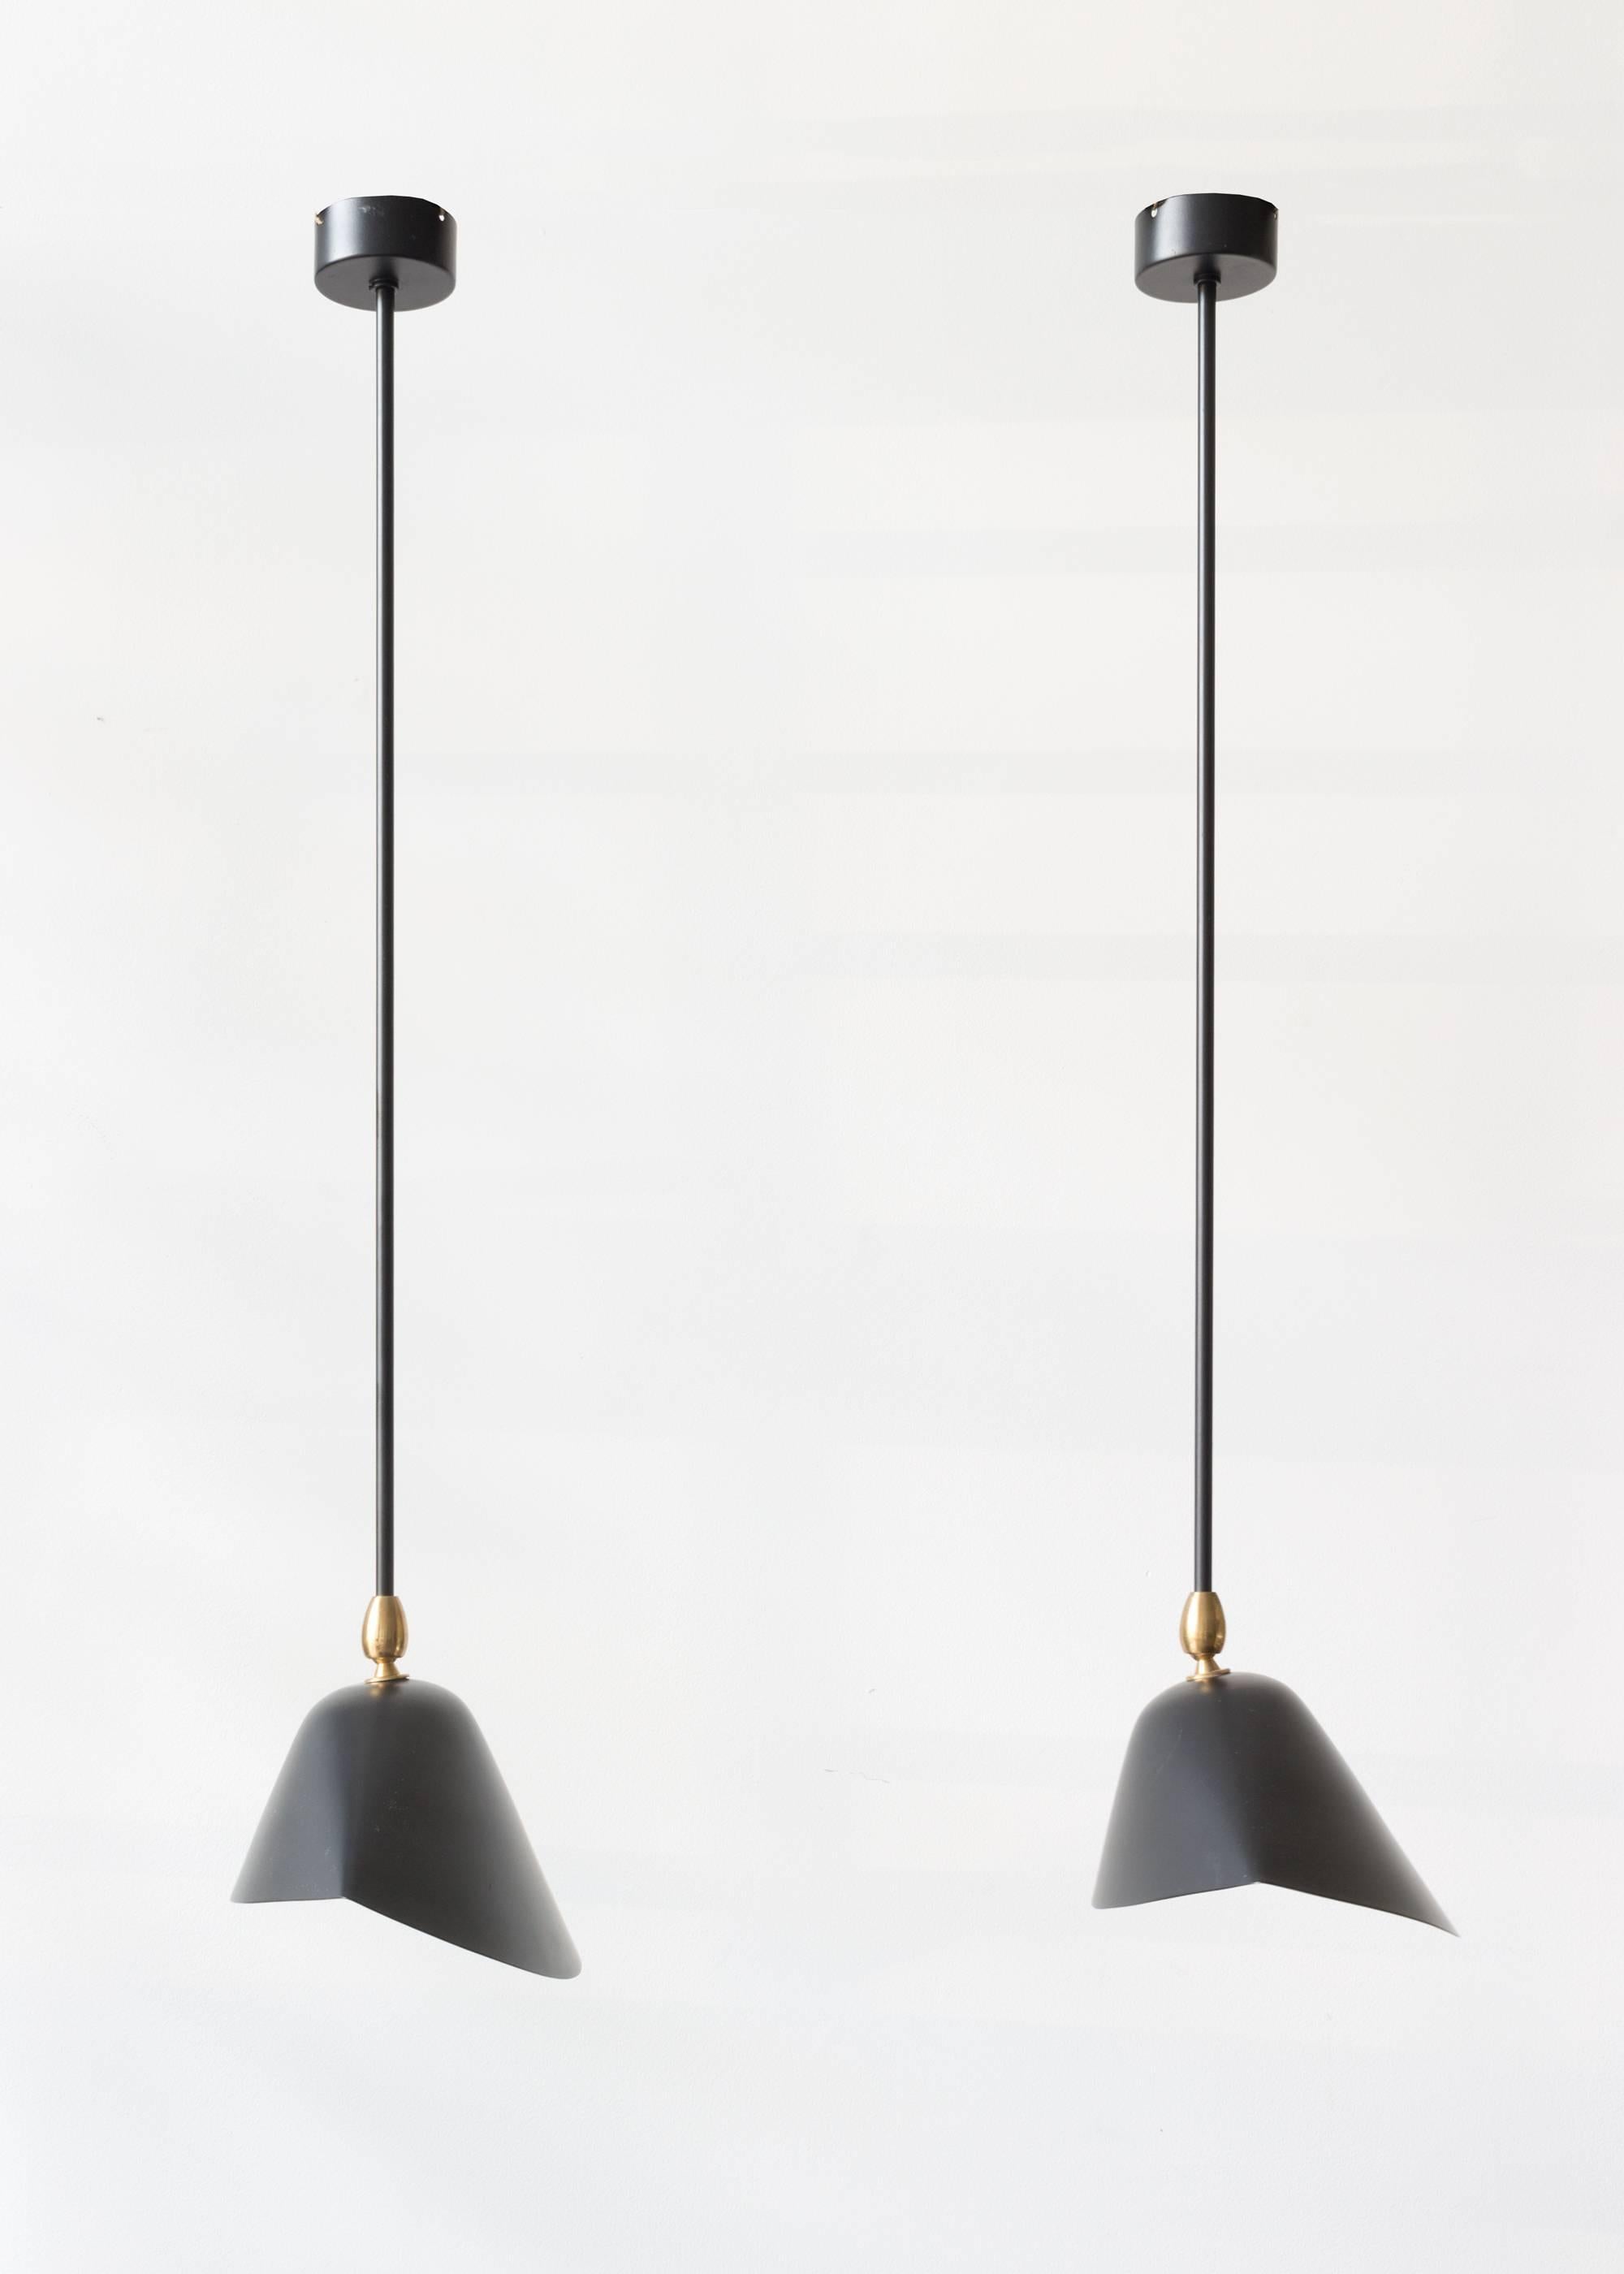 Serge Mouille "Library Pendant" 

The tripod shade is a classic Serge Mouille icon. The body and shade are made from molded lacquered metal, the interior of the shade is finished in lacquered white to reflect the light. Hardware and